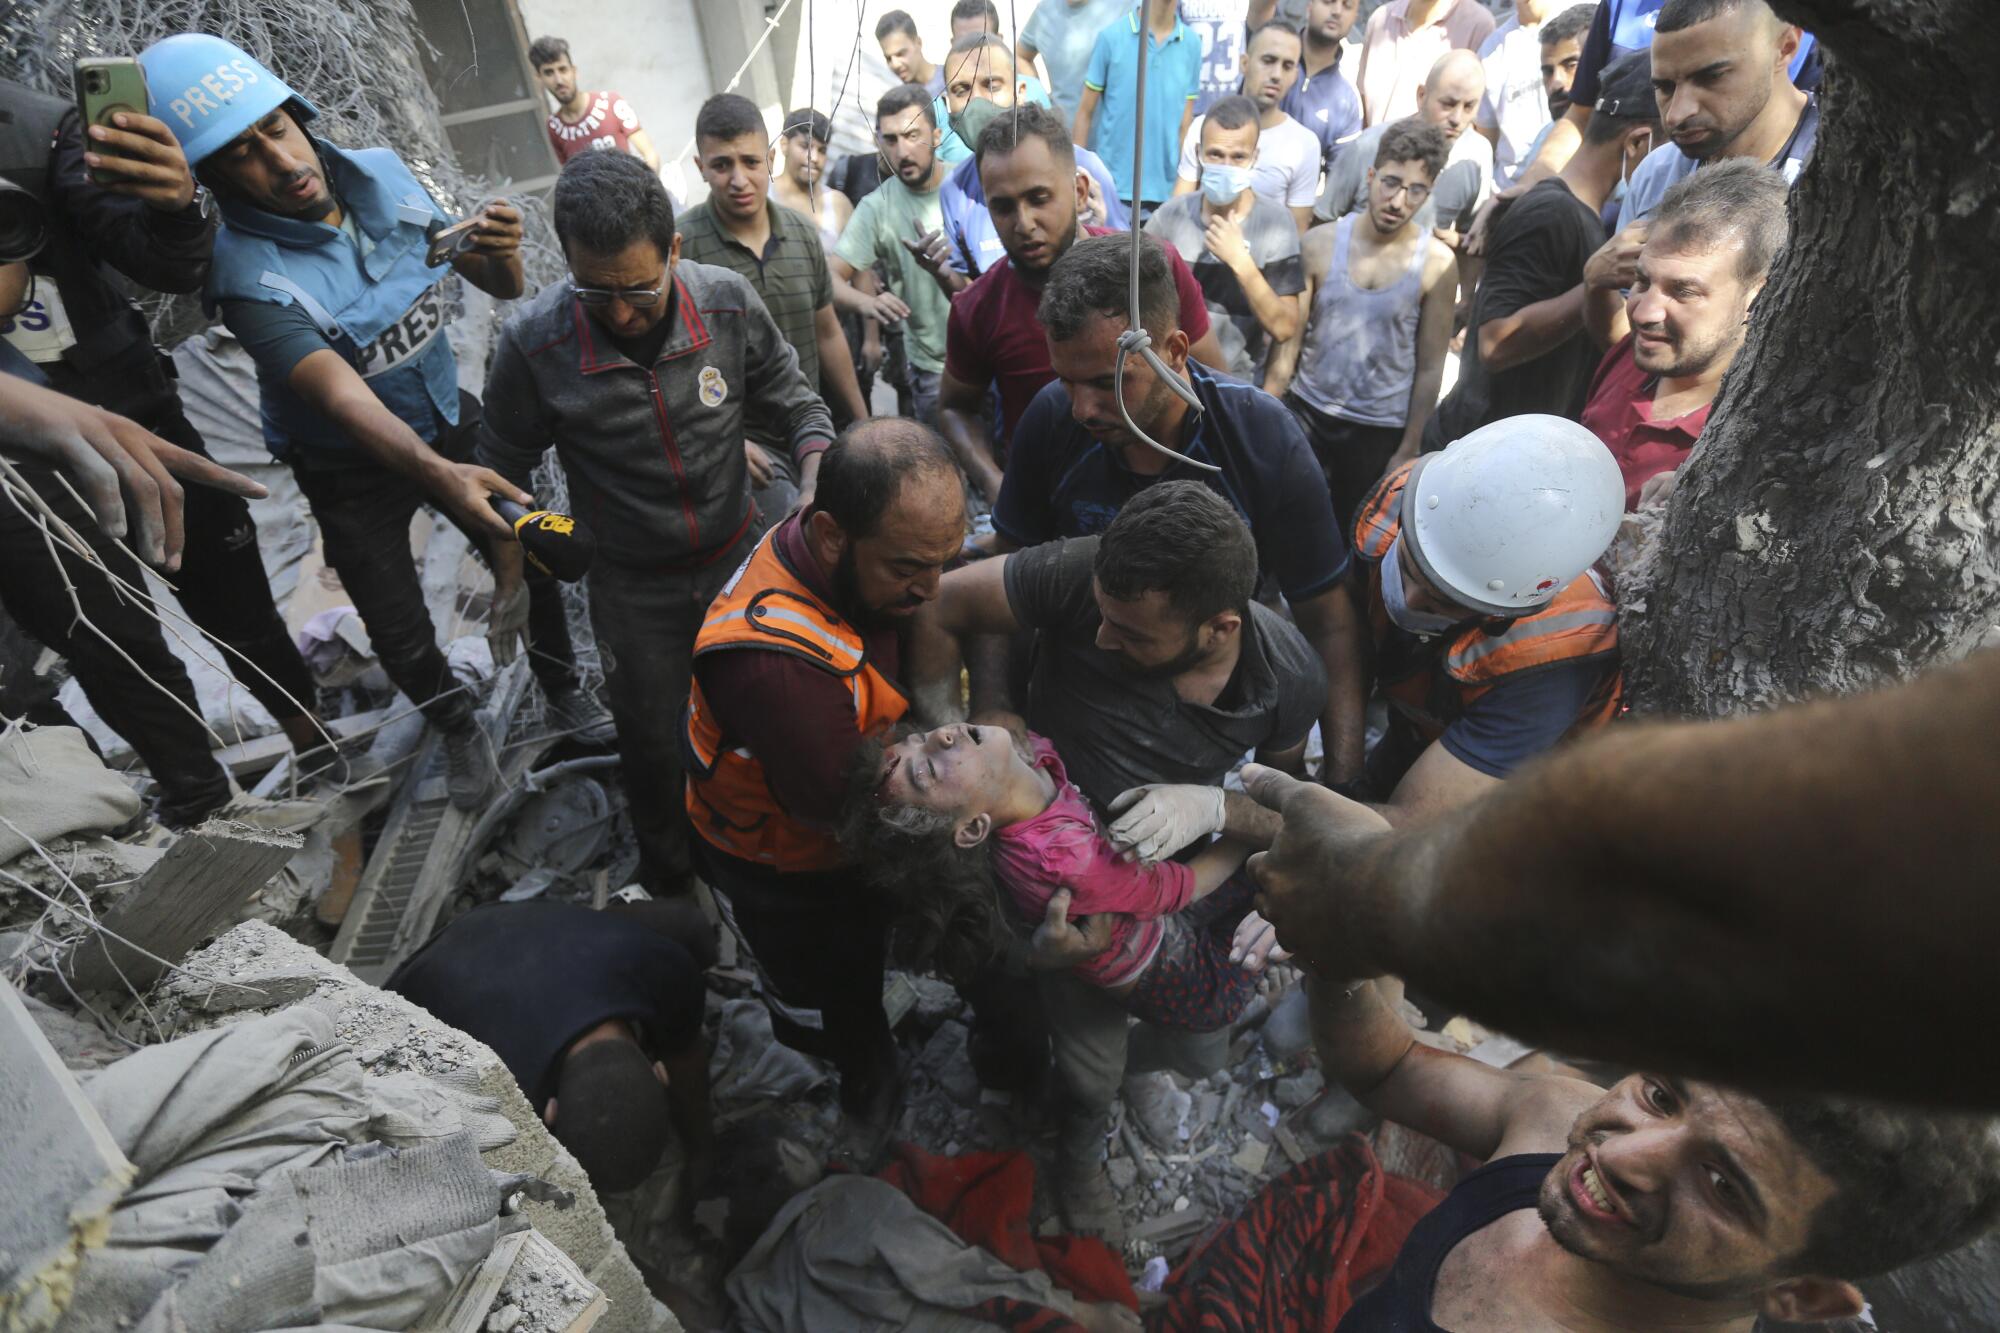 Two men hold a child in a red top amid rubble as a crowd looks on 